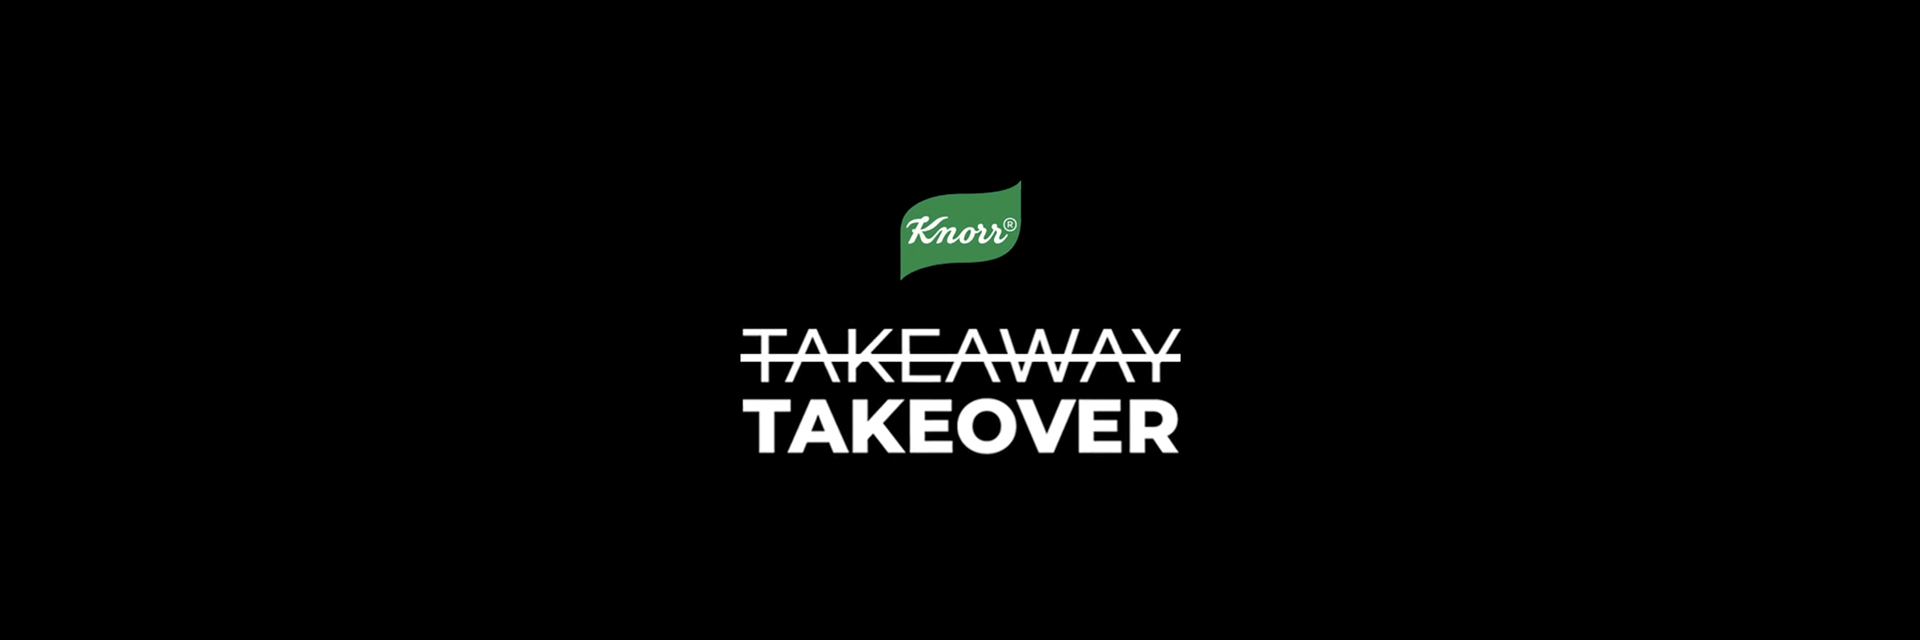 Knorr - Takeaway Takeover